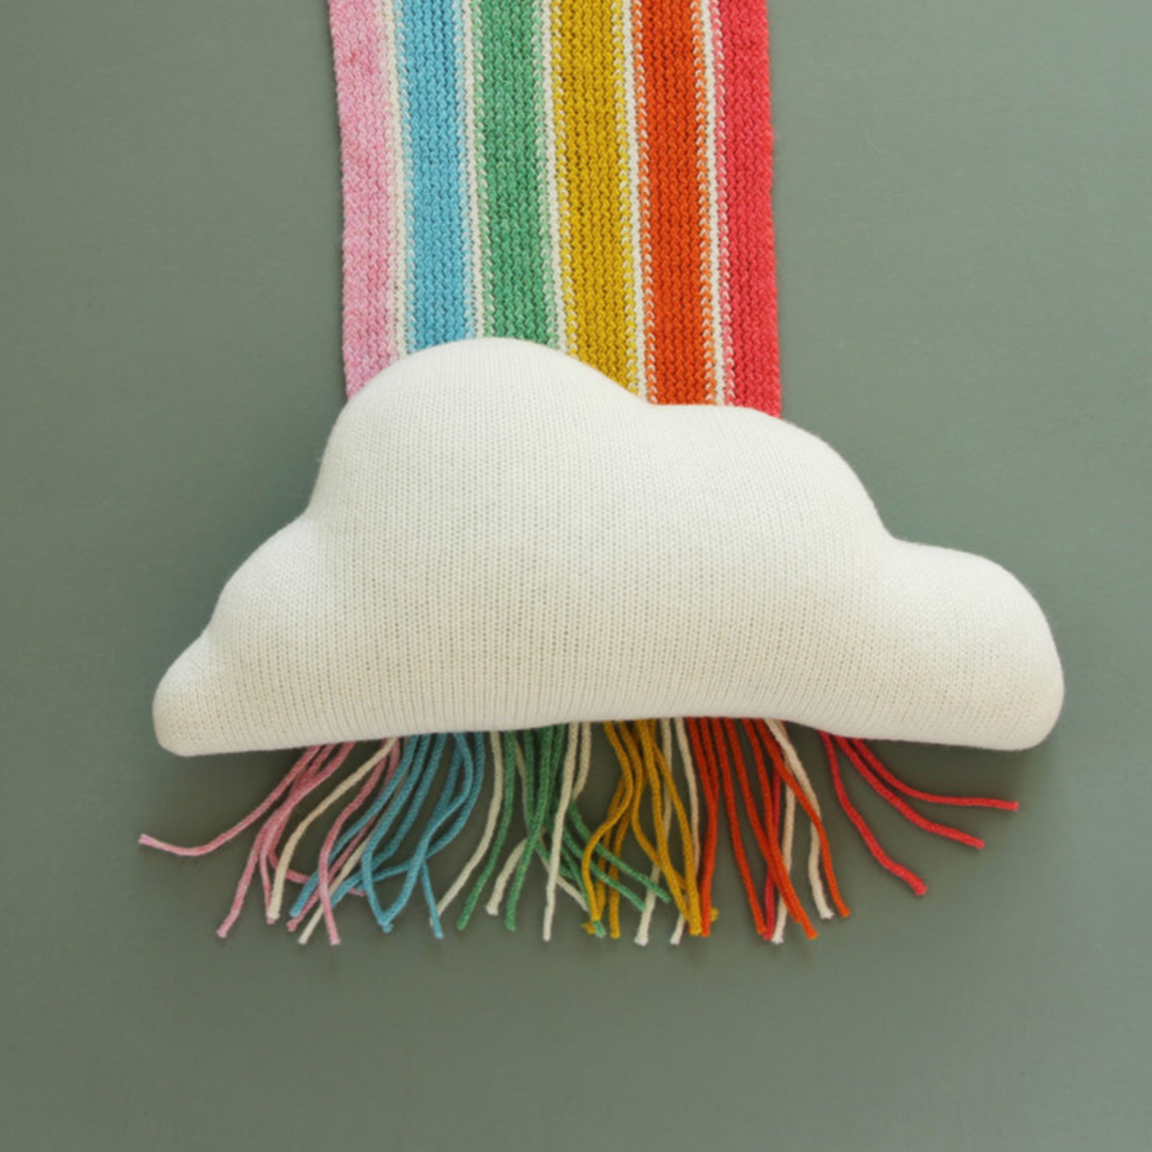 Cloud Shaped Cushion - small by Donna Wilson